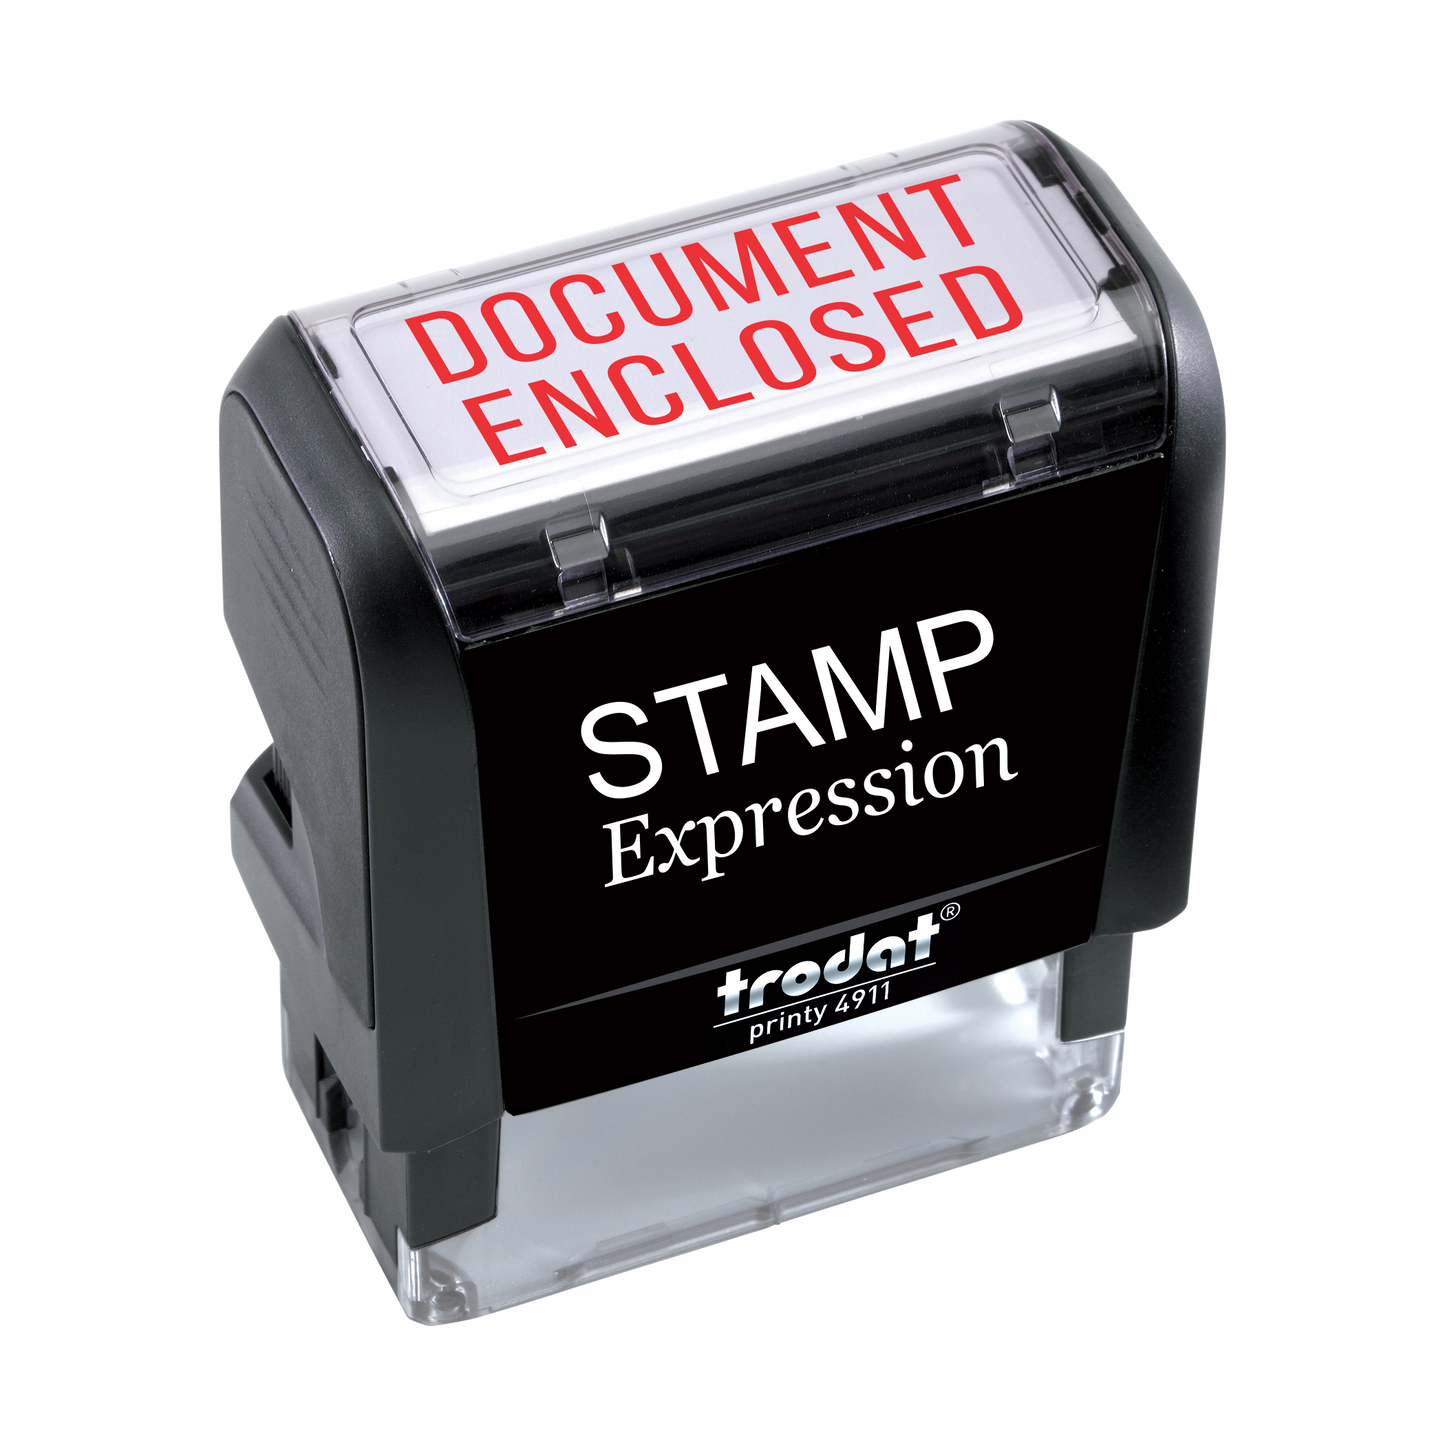 Document Enclosed Office Self Inking Rubber Stamp (SH-5502)